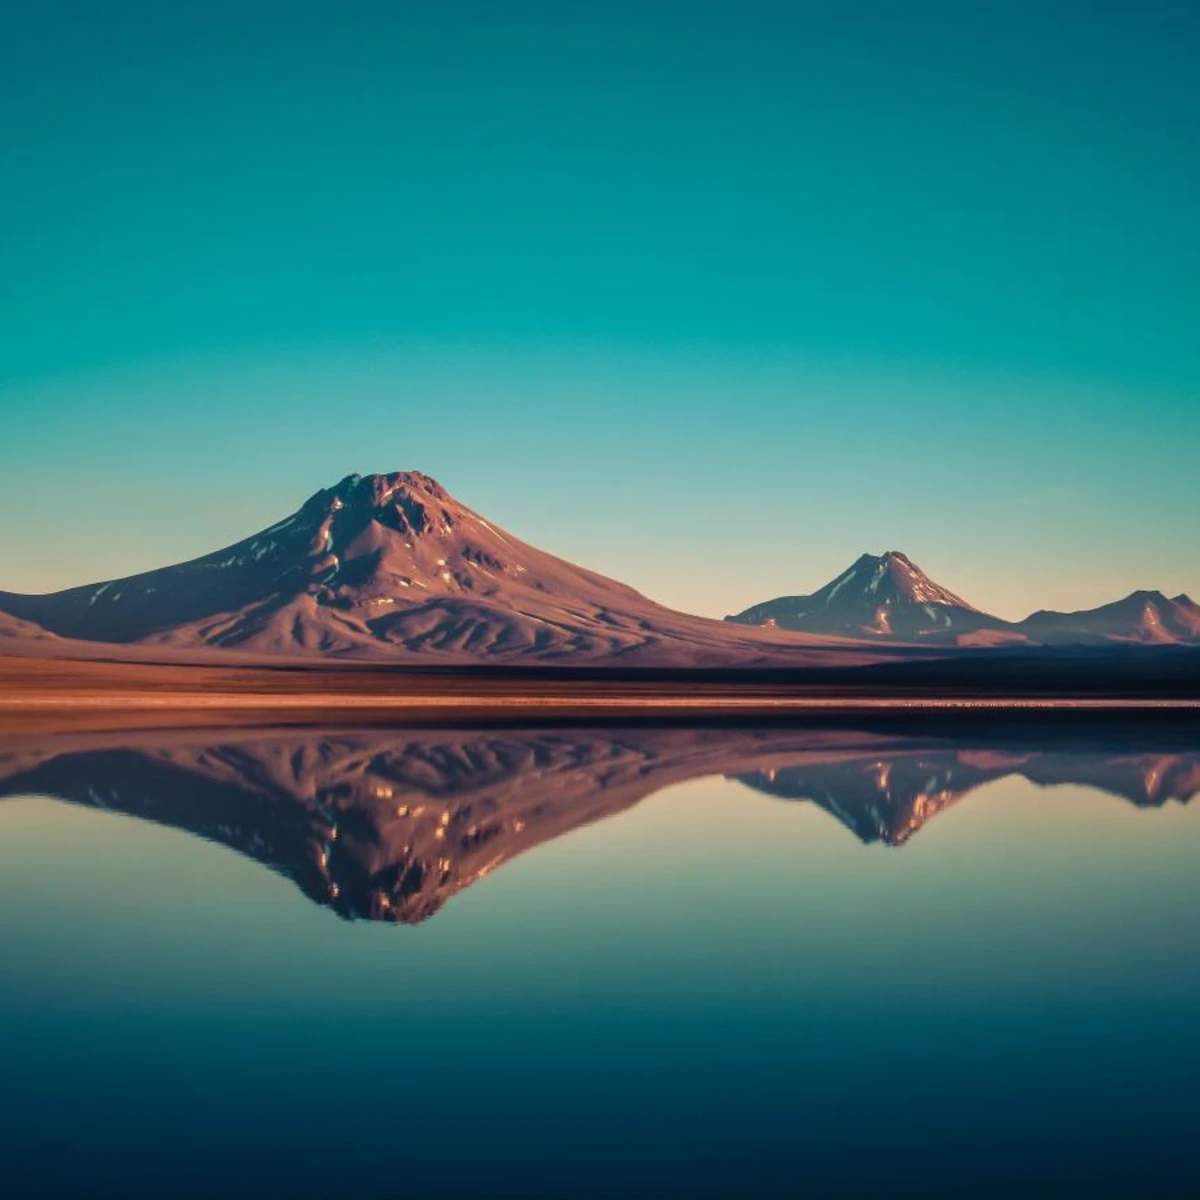 Mountains reflecting in the water under a blue sky in Chile